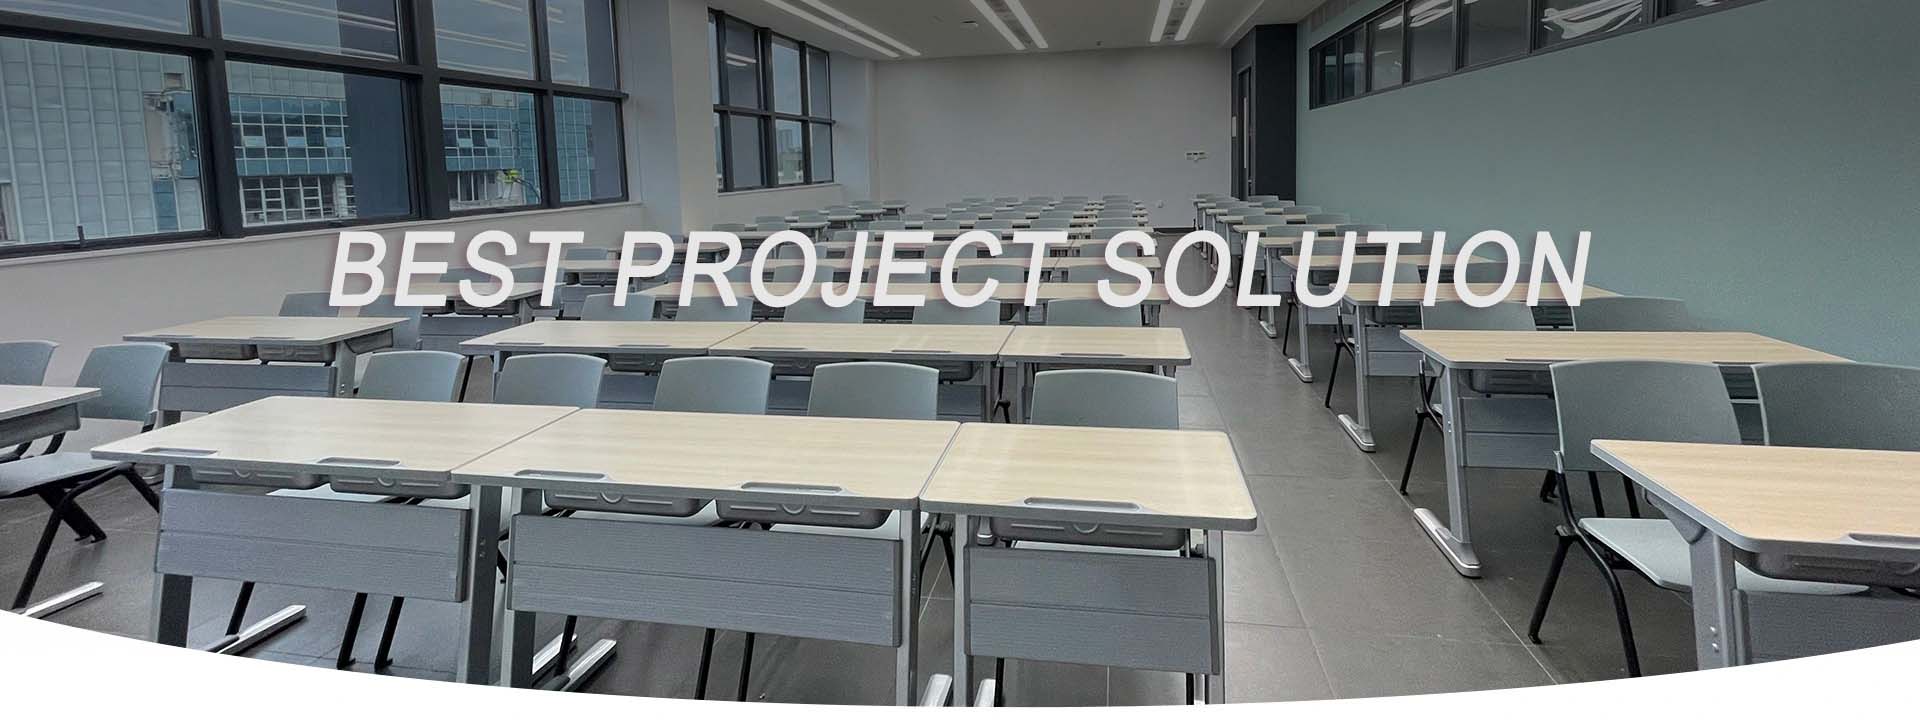 Best Project Solution